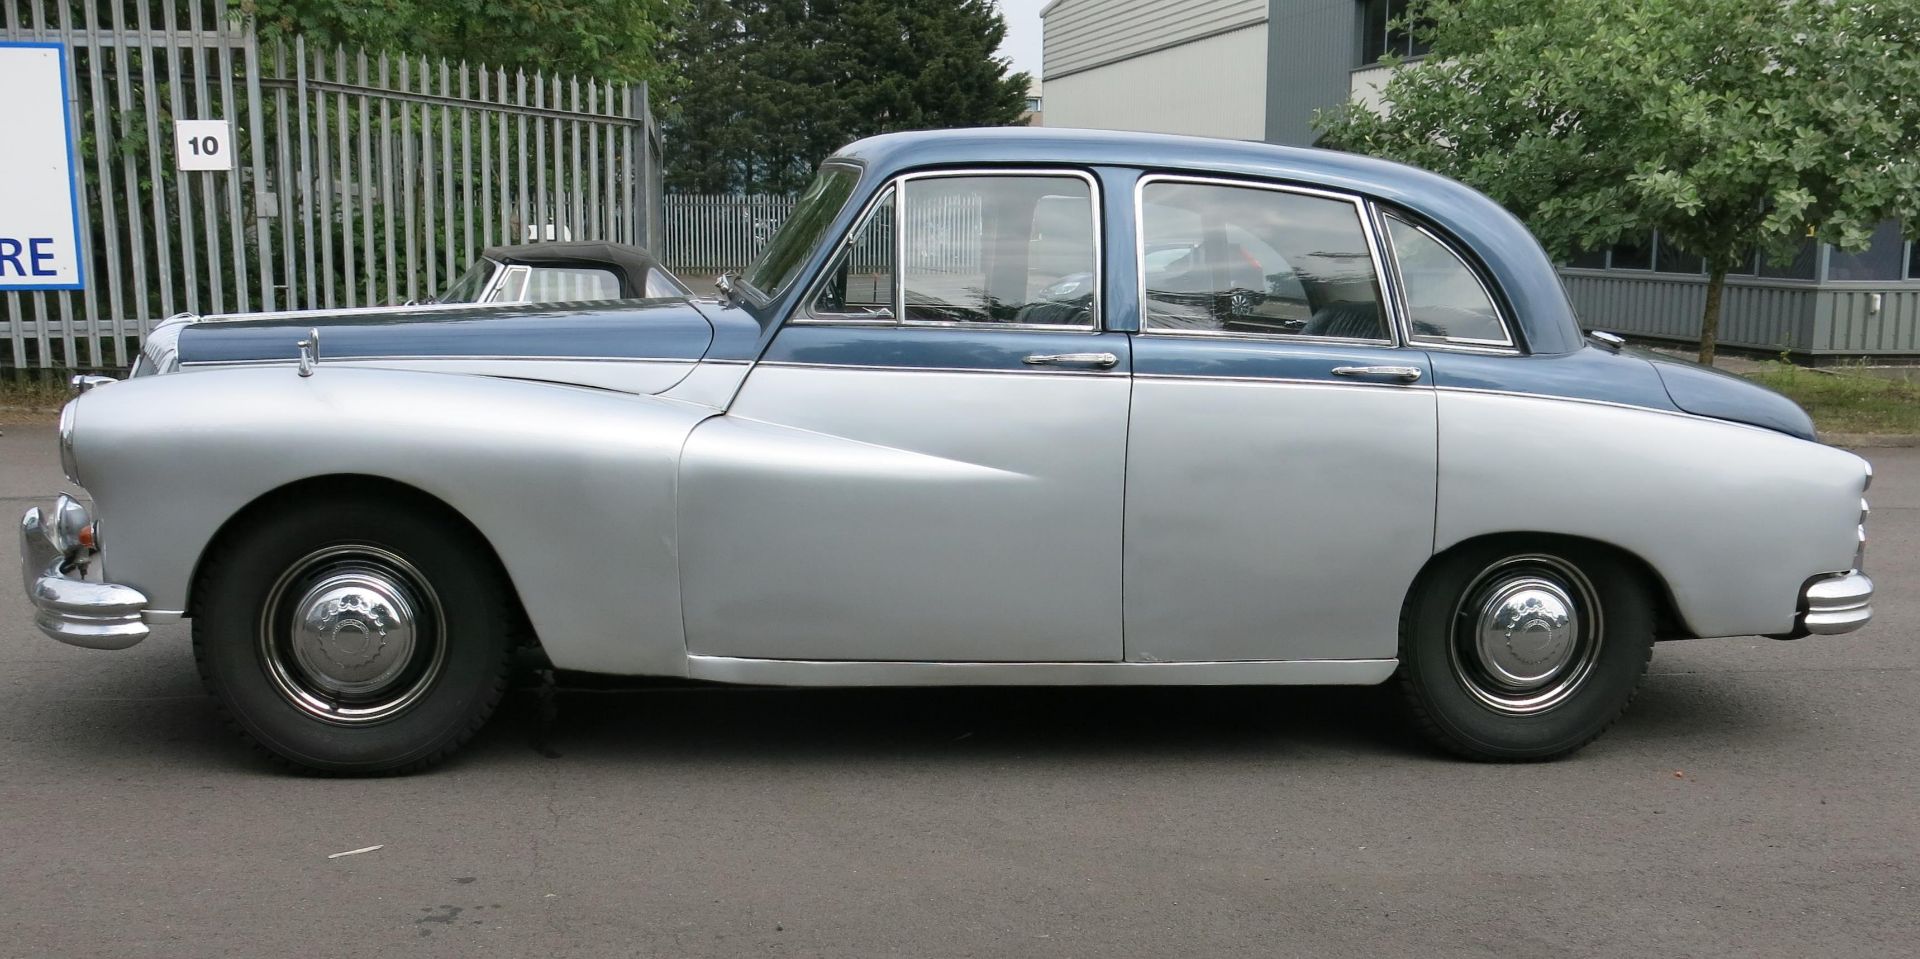 1960 Daimler Majestic WFU 641. 66421 miles. 3794cc. Blue & silver coachwork with full black - Image 4 of 28